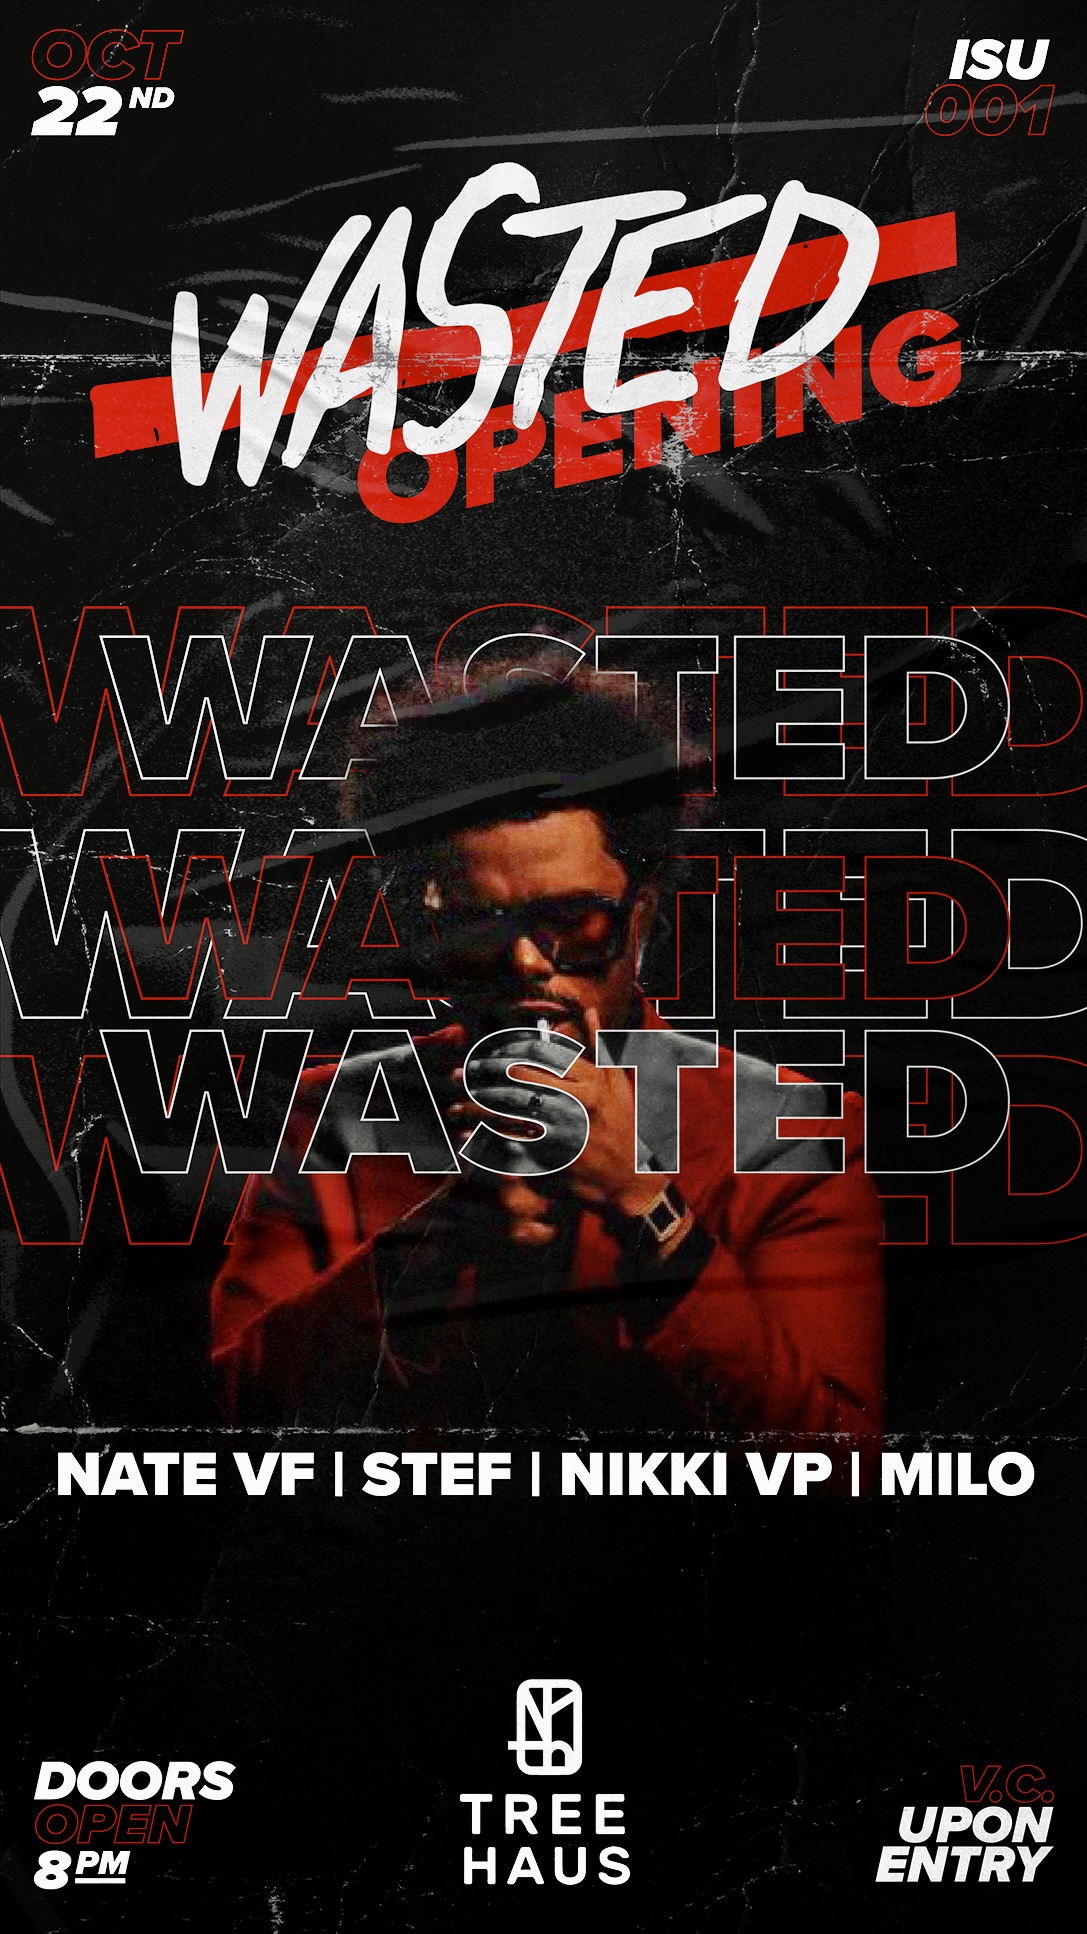 Wasted .:. The Opening poster